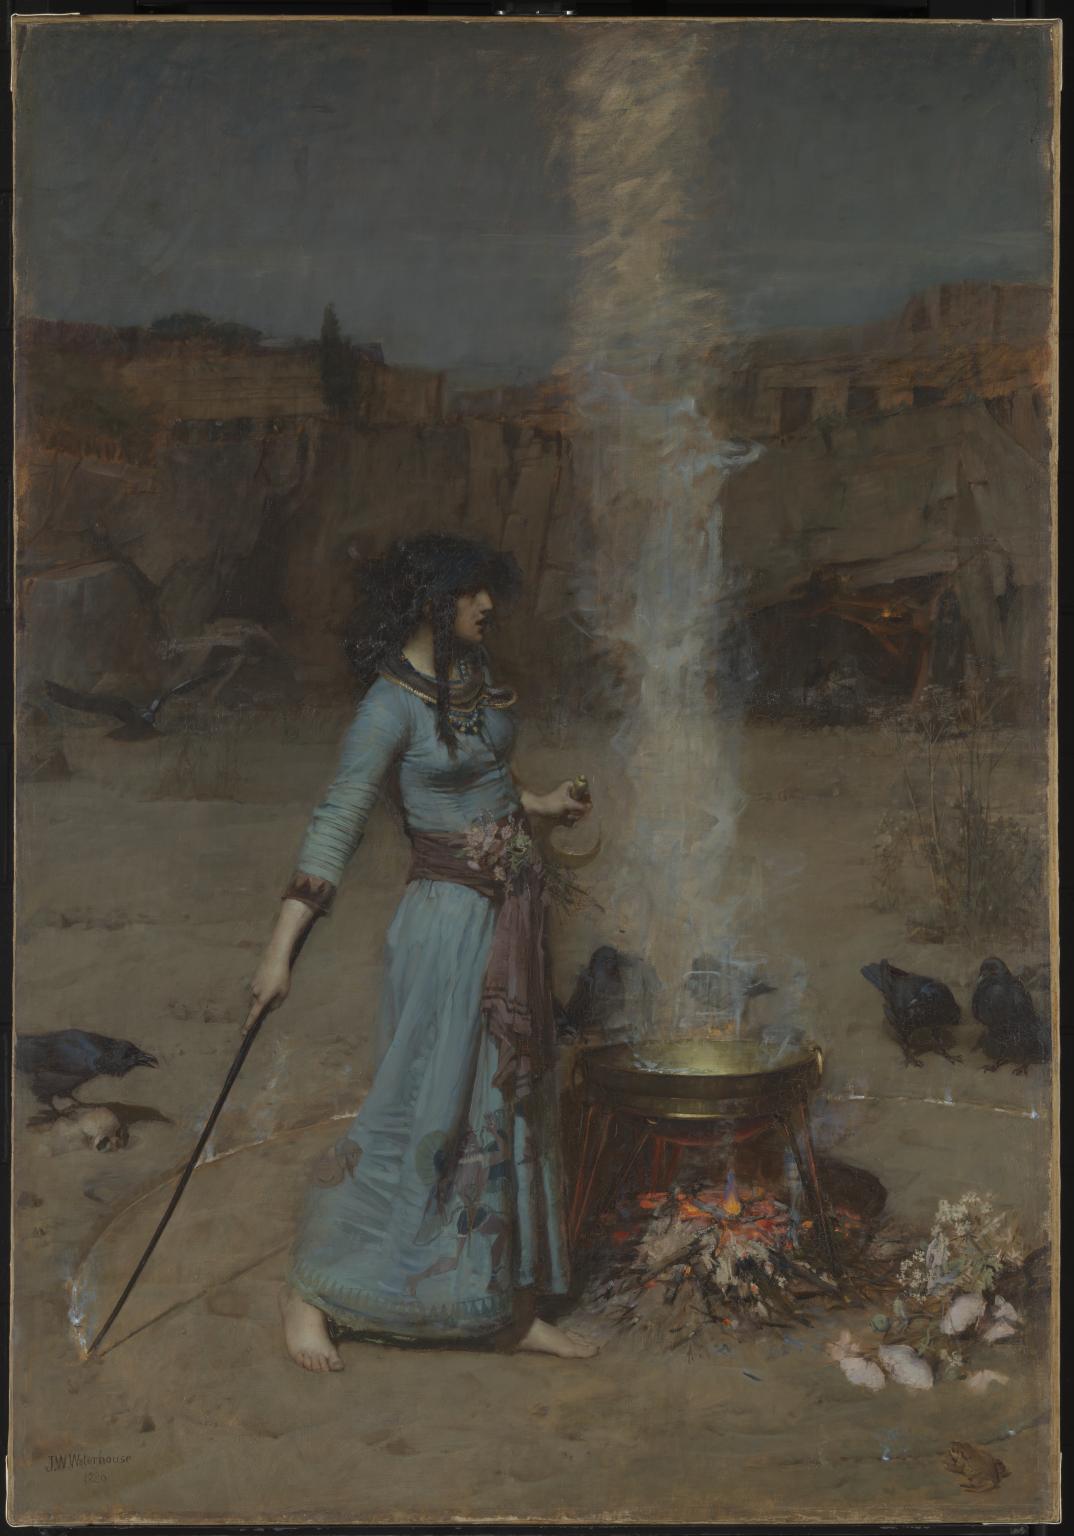 A woman beside a pot over a fire holding a stick to draw a large circle on the ground